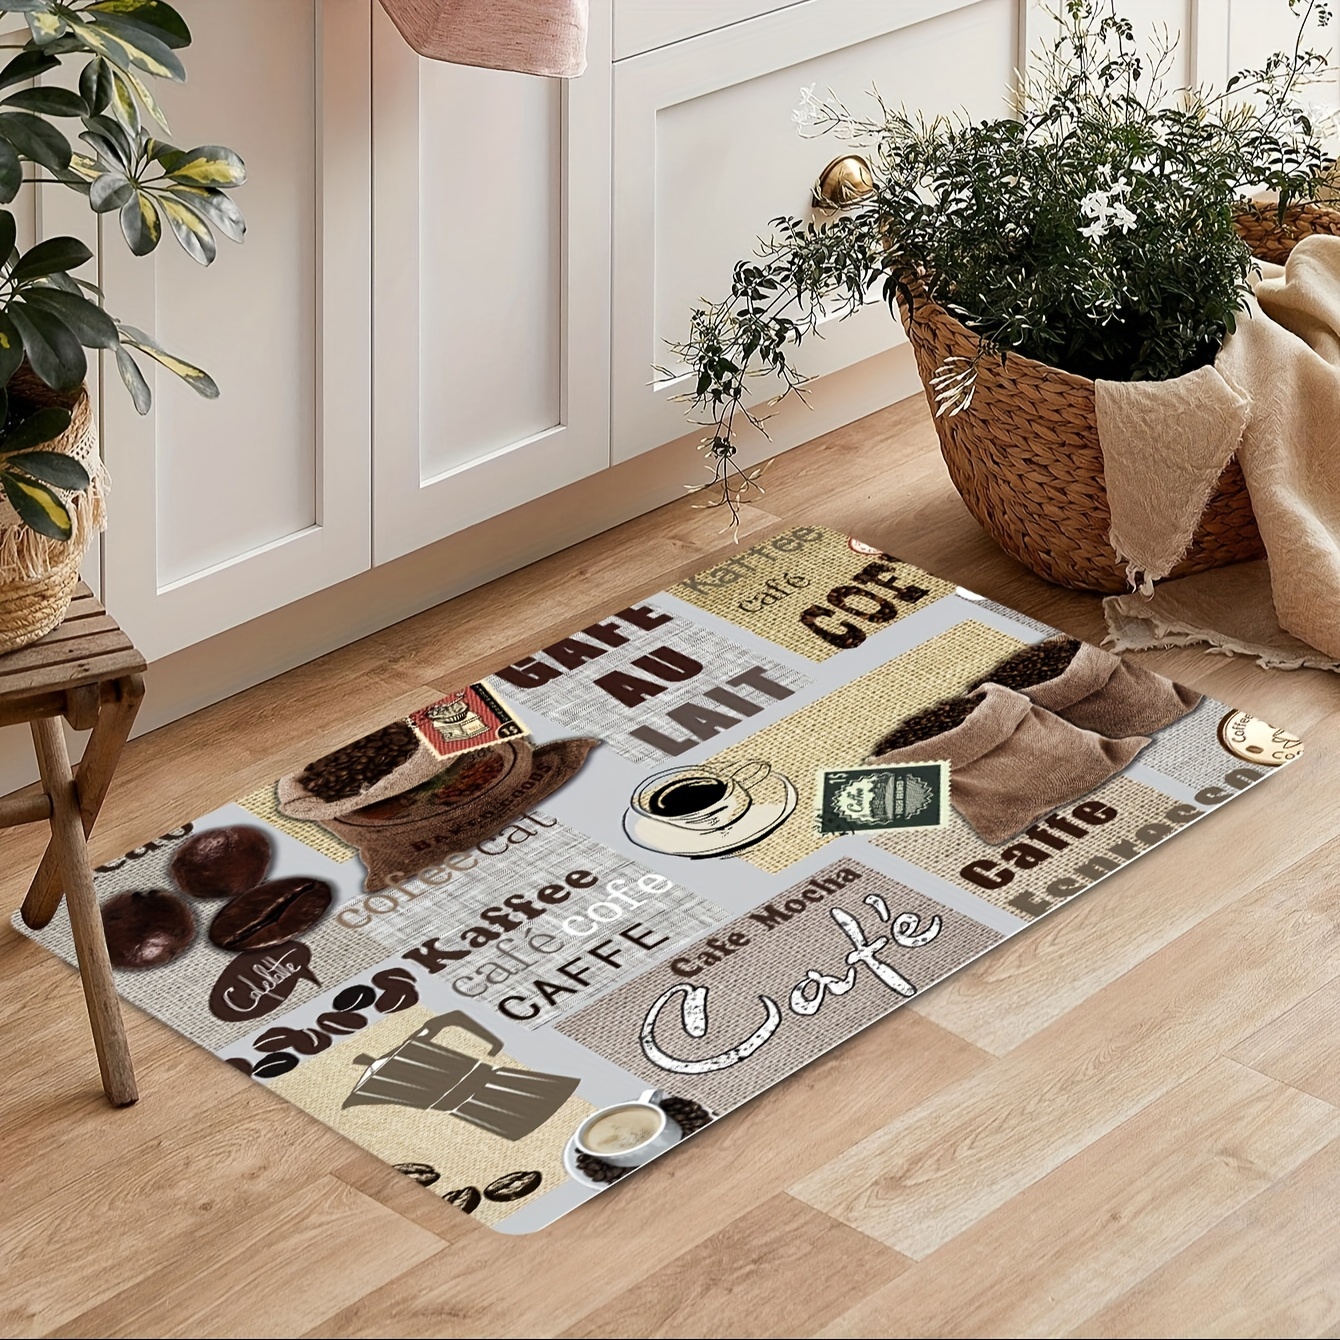 Coffee Cup Printed Kitchen Rug, Anti-slip Absorbent Memory Foam Mat, Soft  Anti-fatigue Kitchen Rug, Runner Rug, Throw Rug For Living Room Bedroom  Balcony, Carpet For Kitchen Home Office Hallway Sink Laundry 